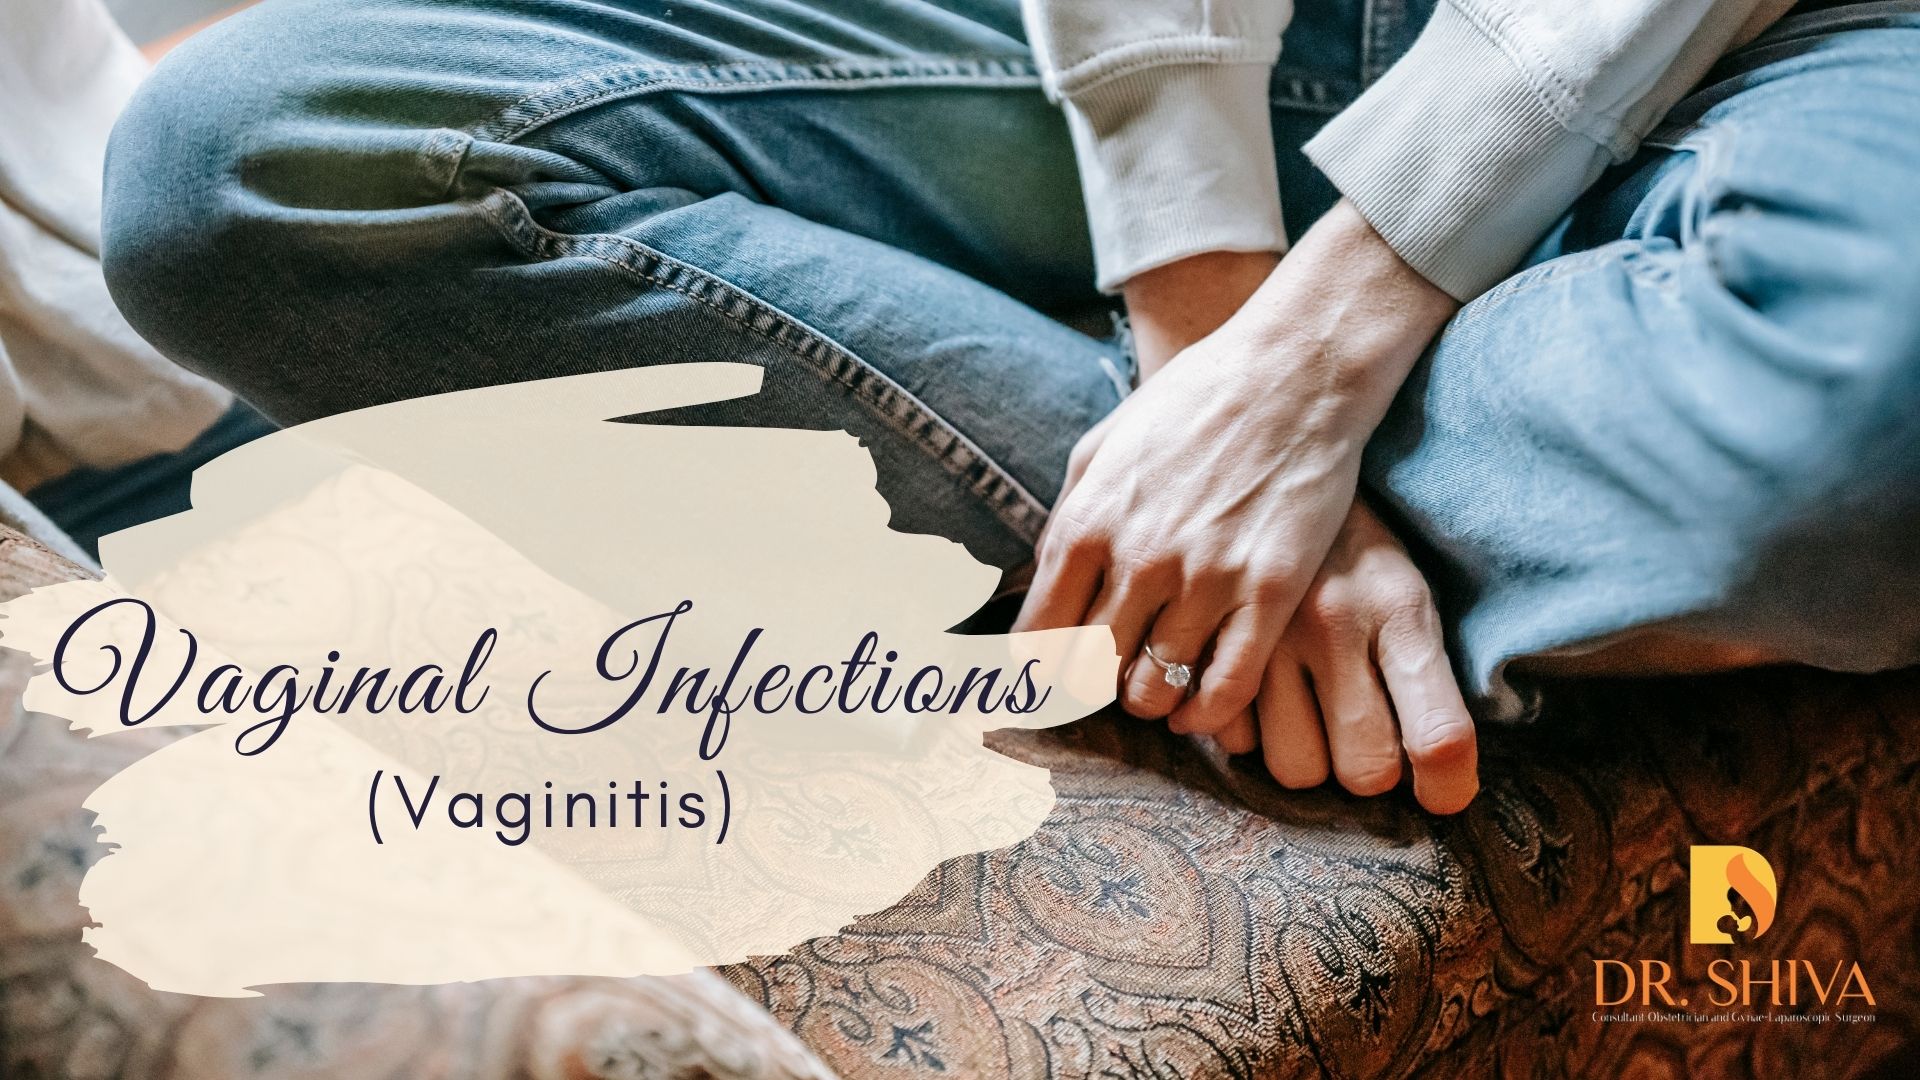 Vaginal Infections/Vaginitis